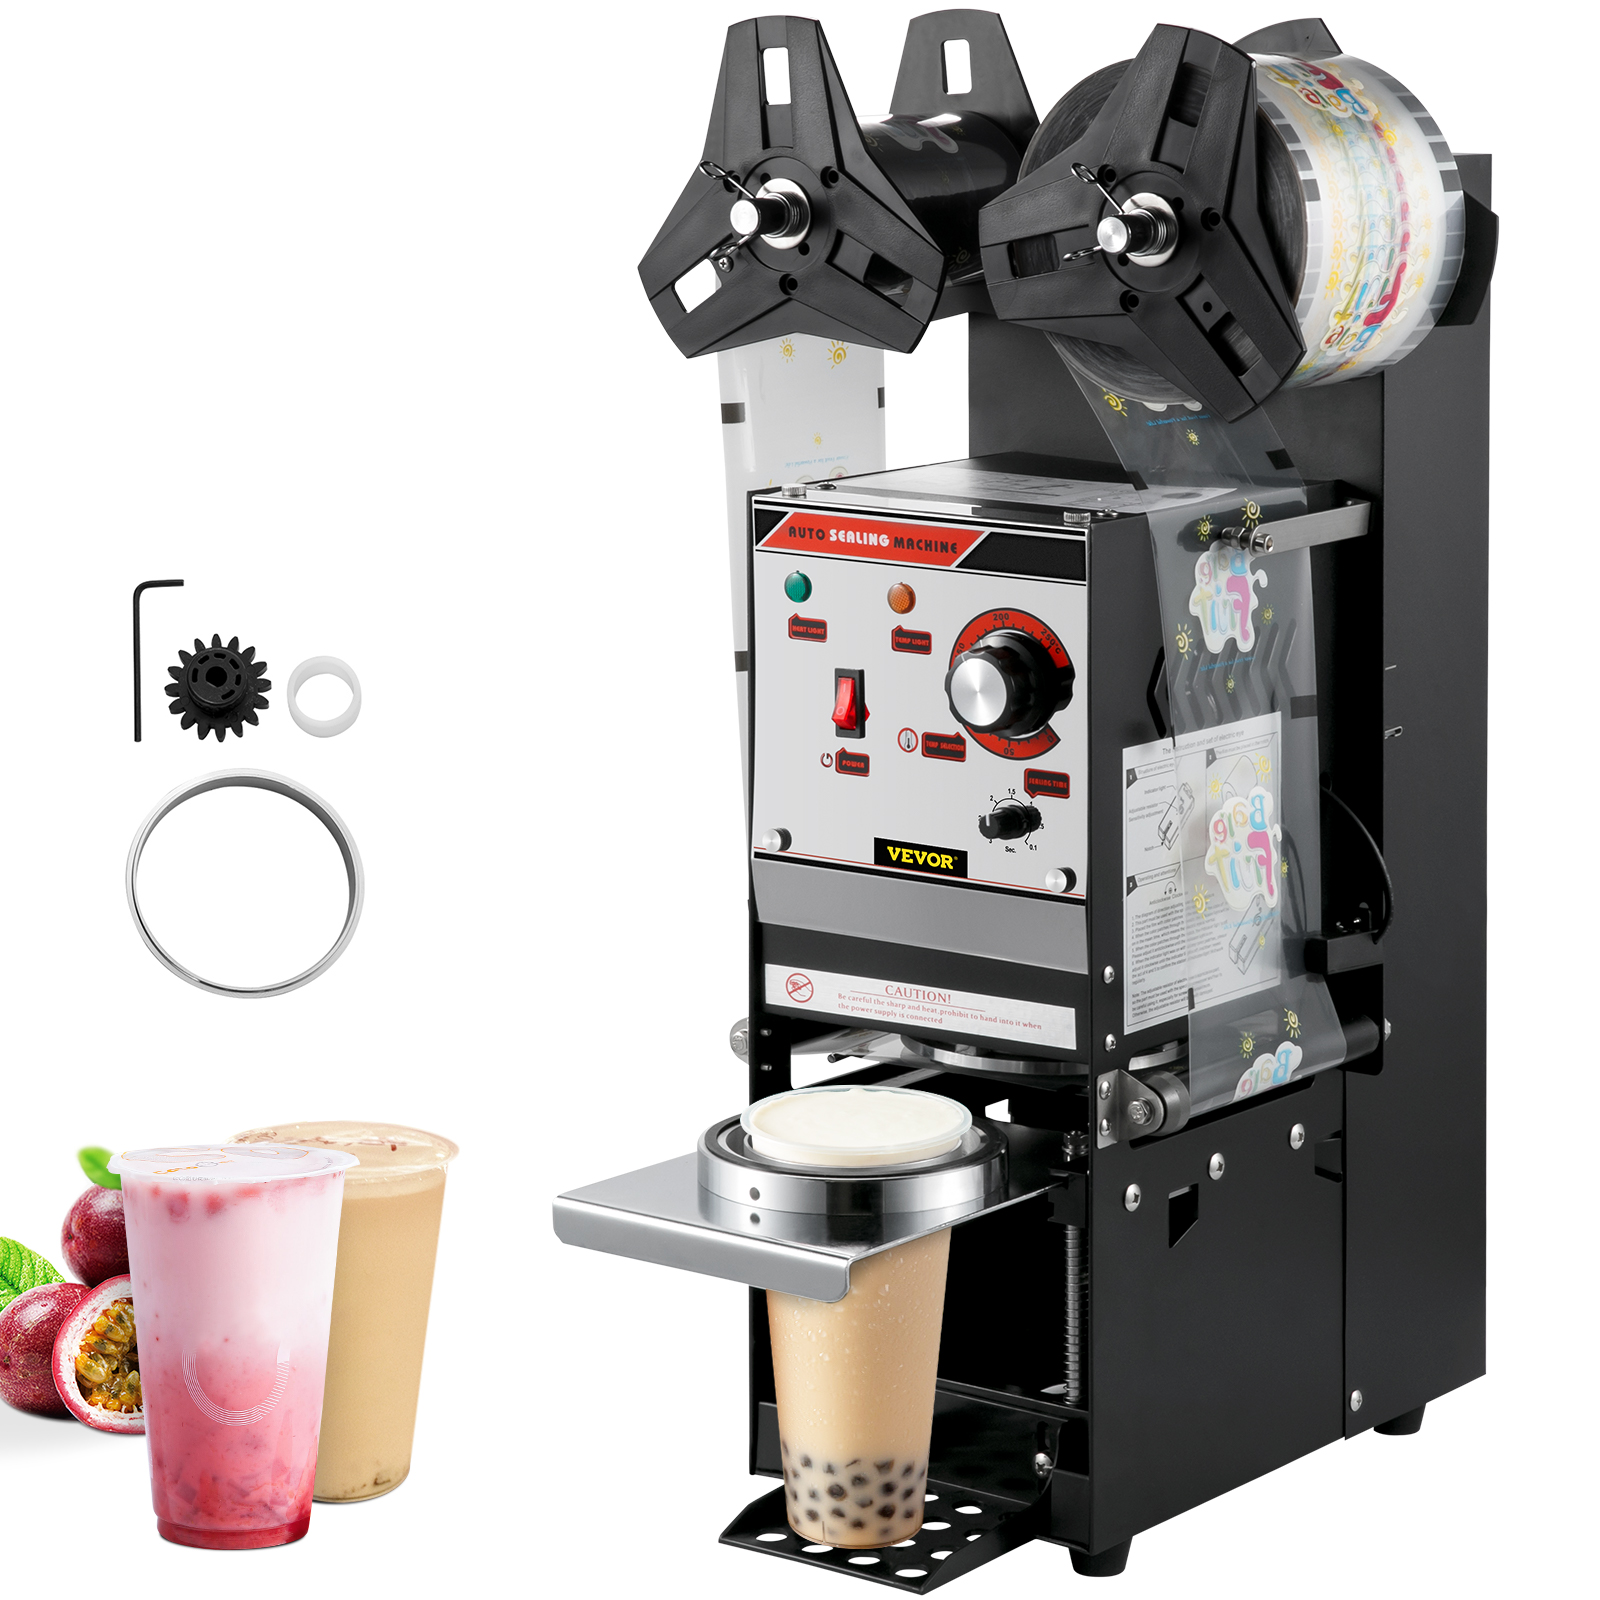 Vevor Semi-automatic Cup Sealing Machine Cup Sealer Black 300-500 Cups/hour от Vevor Many GEOs